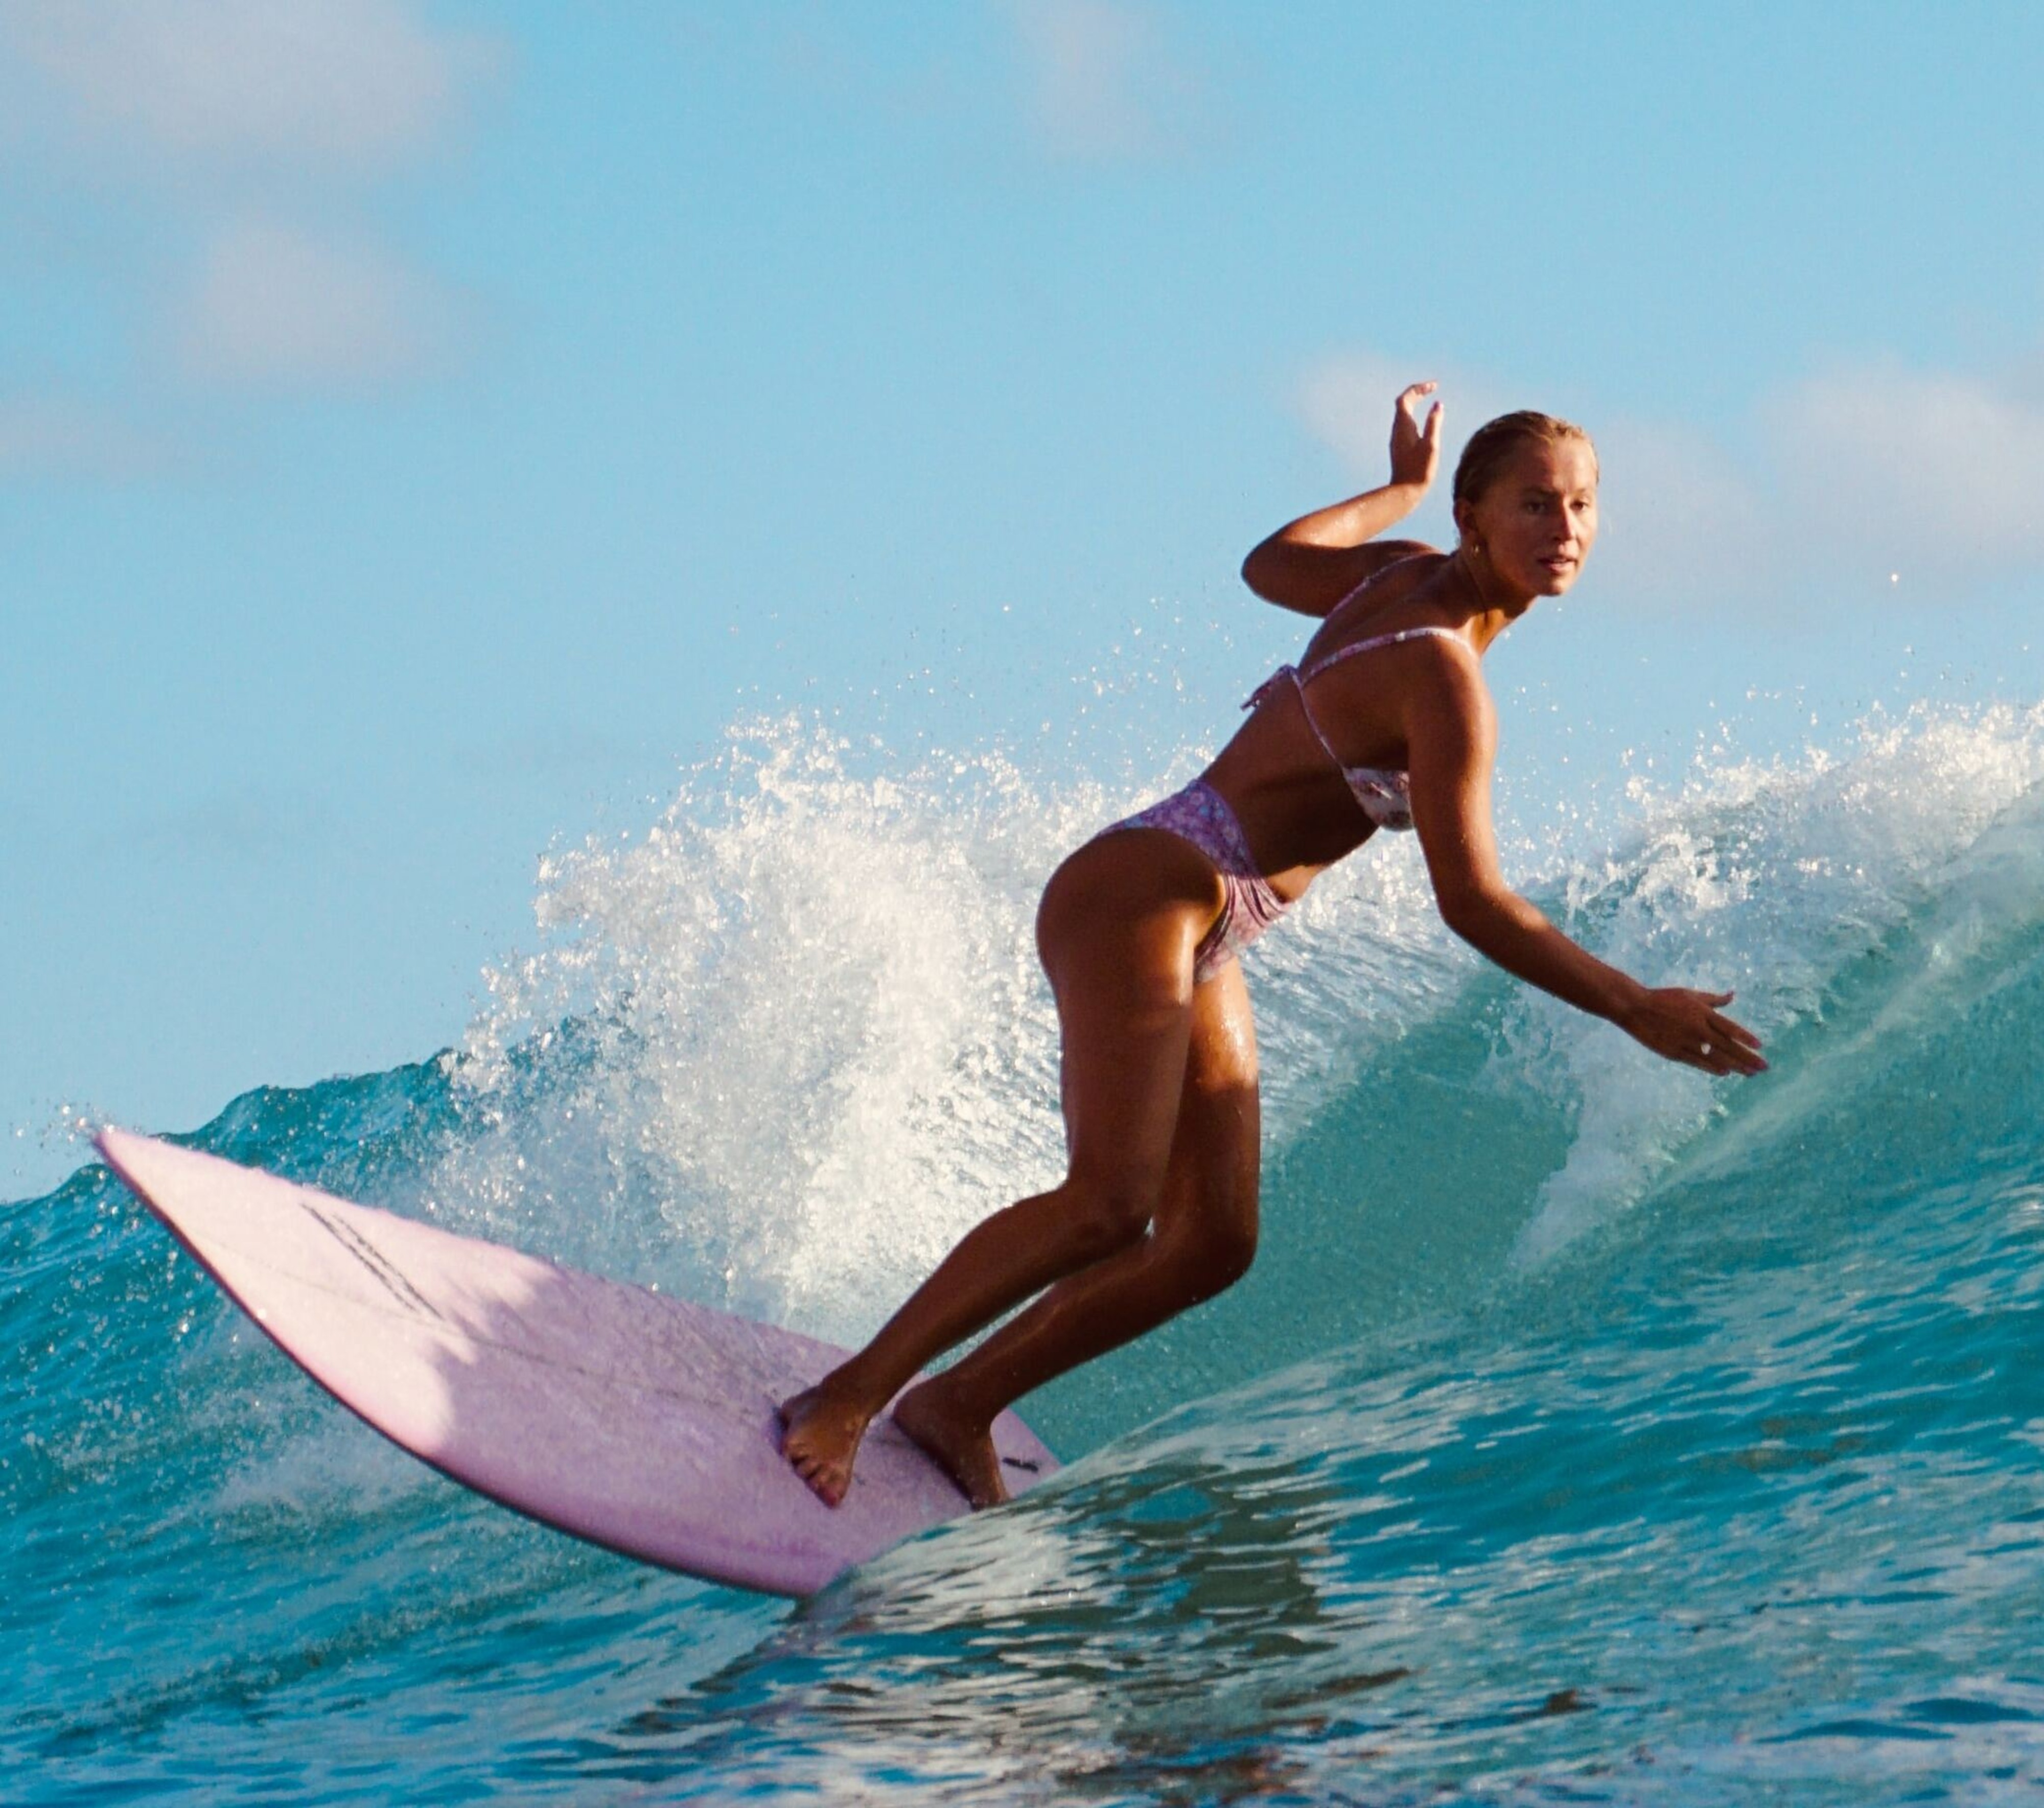 Woman surfing on green wave